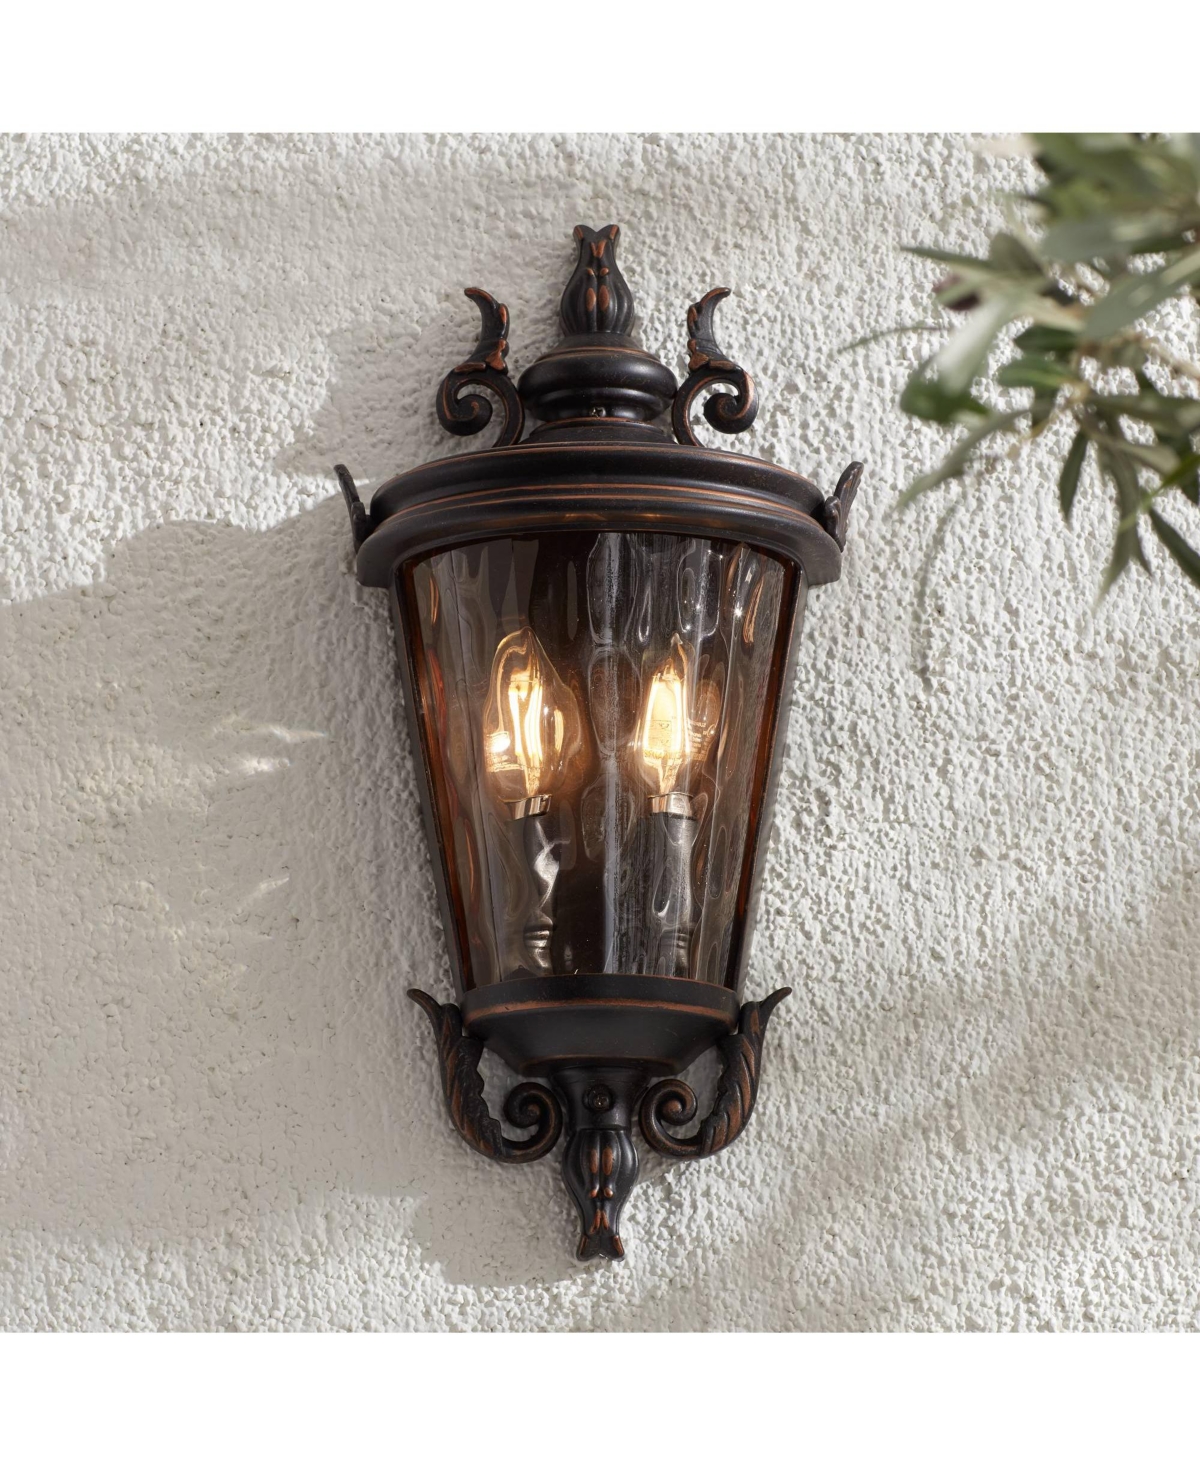 Casa Marseille Vintage-like Outdoor Wall Light Fixture Veranda Bronze 17" Champagne Hammered Glass for Exterior House Porch Patio Outside Deck Garage